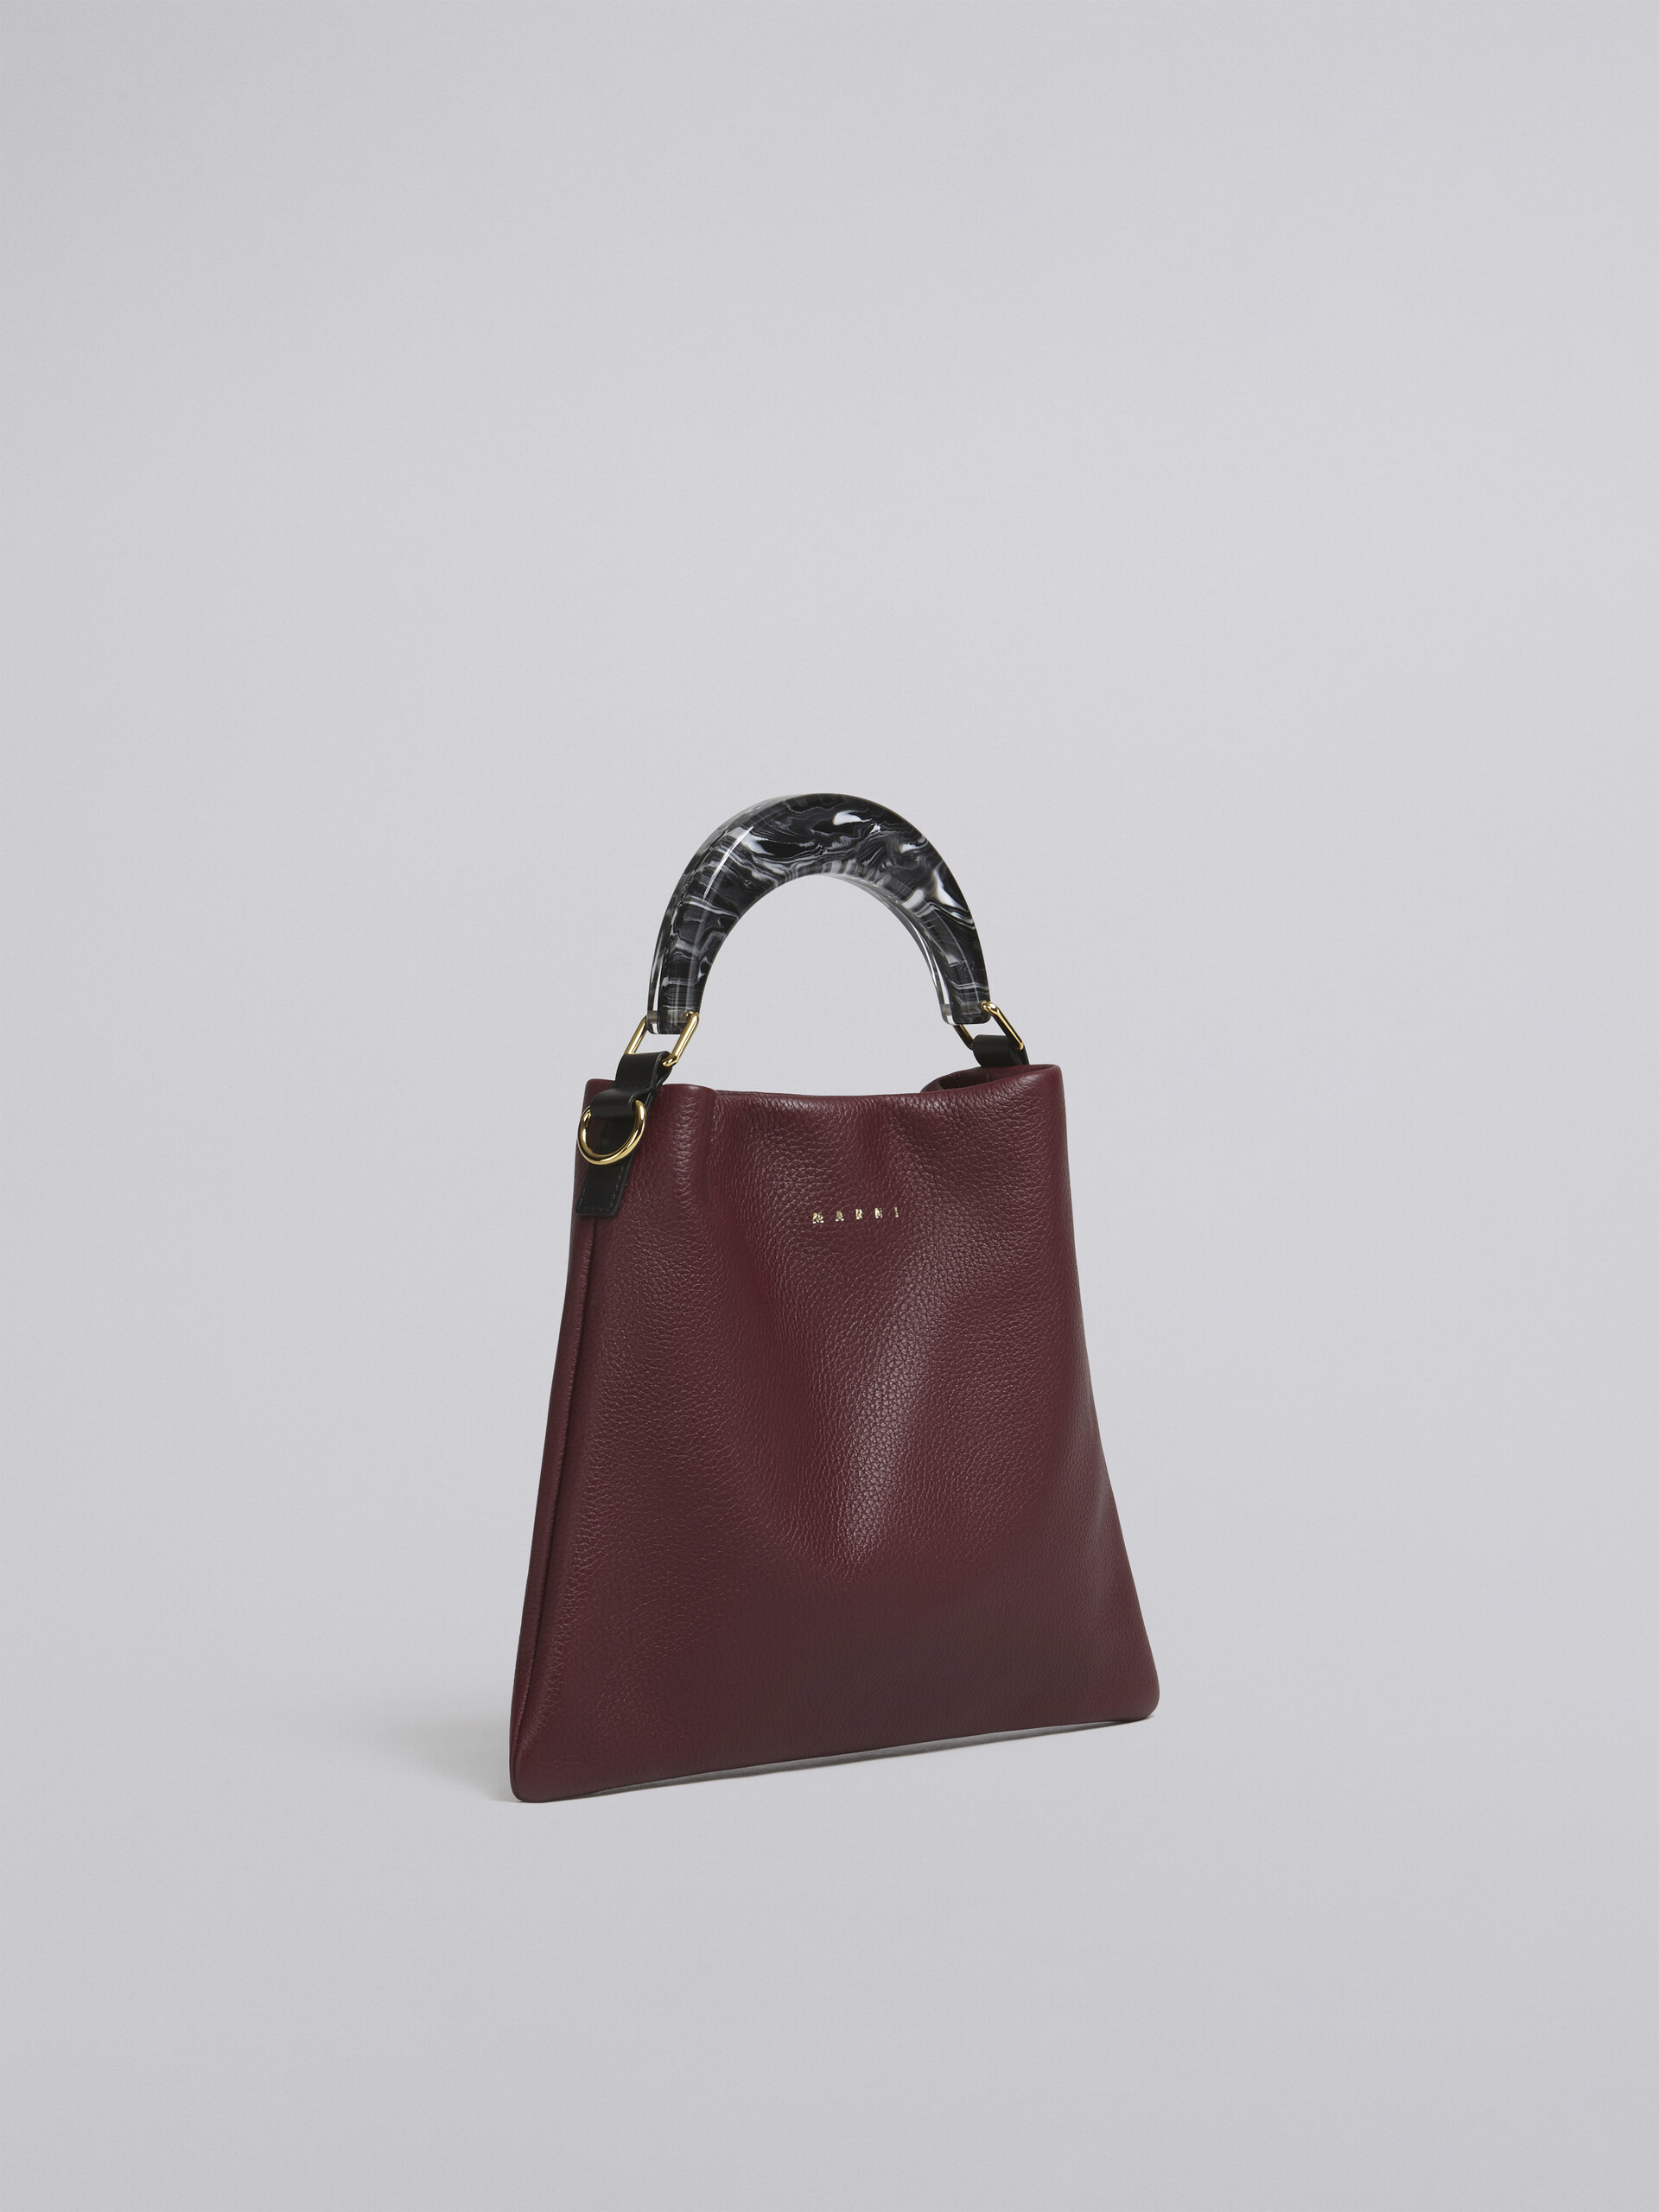 HOBO bag in red grained calfskin and resin handle - Shoulder Bags - Image 6